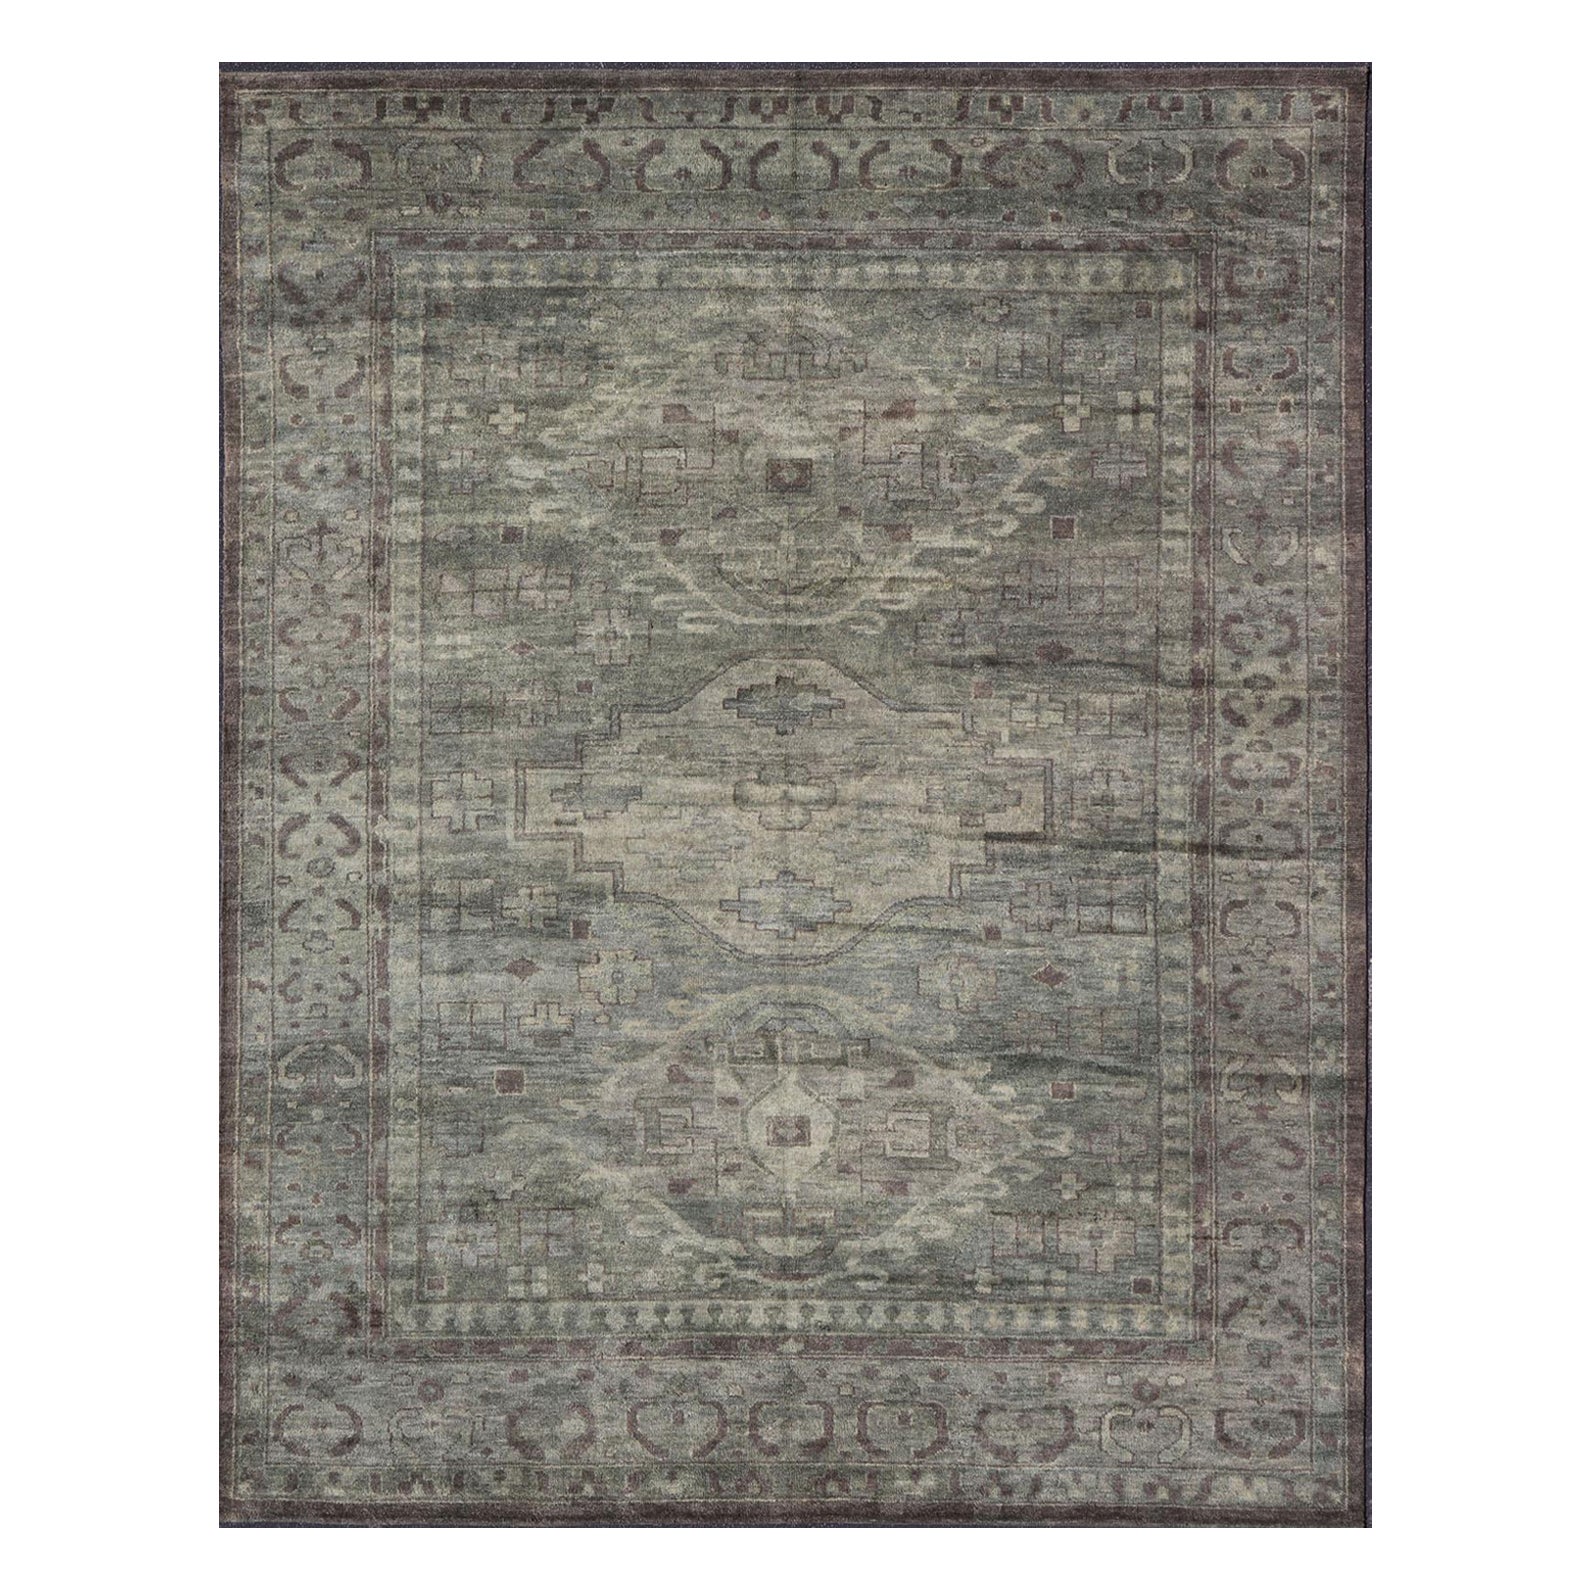 Large Modern Tribal Medallion Khotan in Muted Earthy Green Colors For Sale